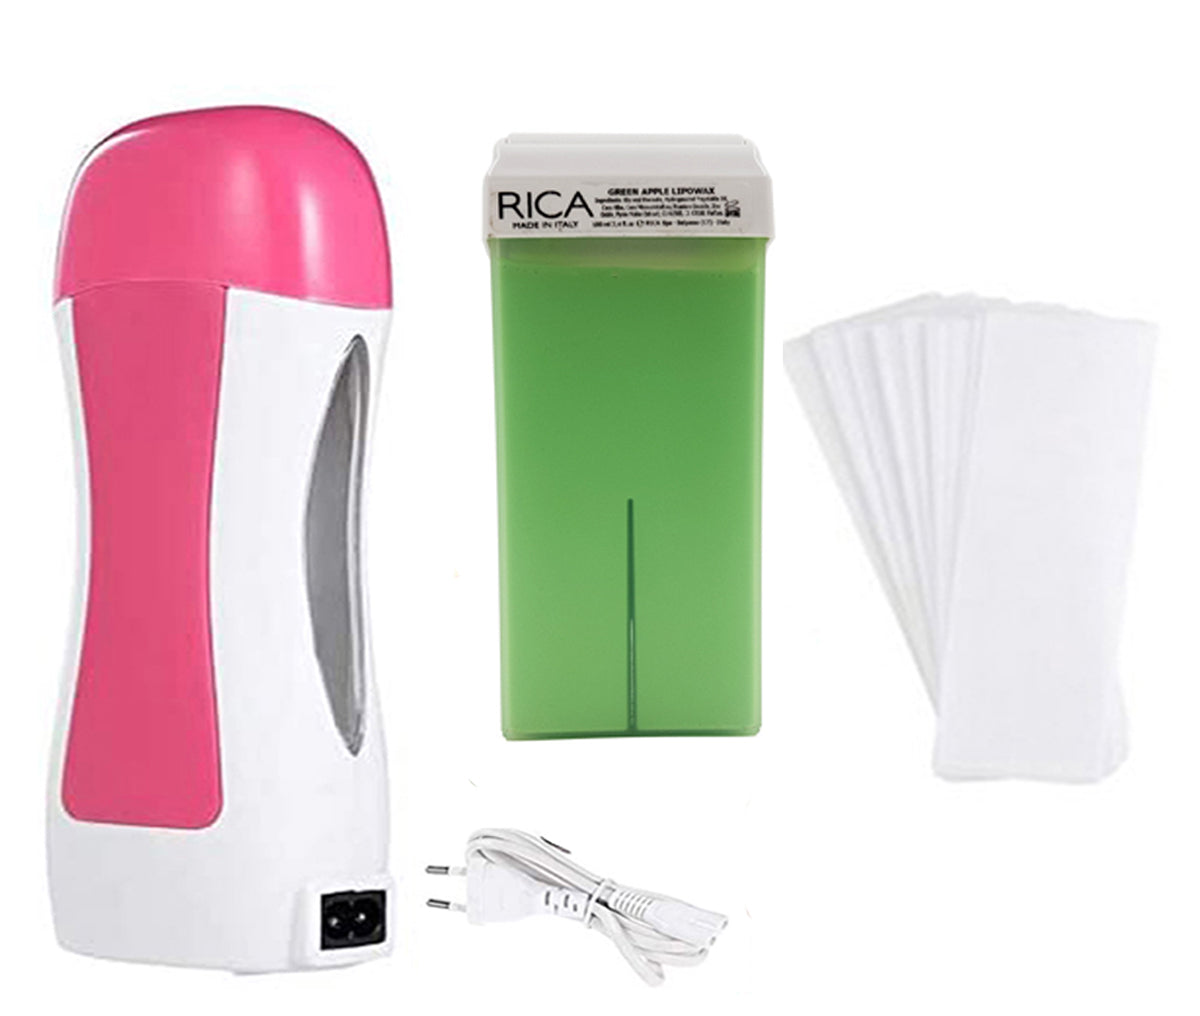 Roll On Wax Heater Hair Removal Body Waxing Kit At Home For Women and Men